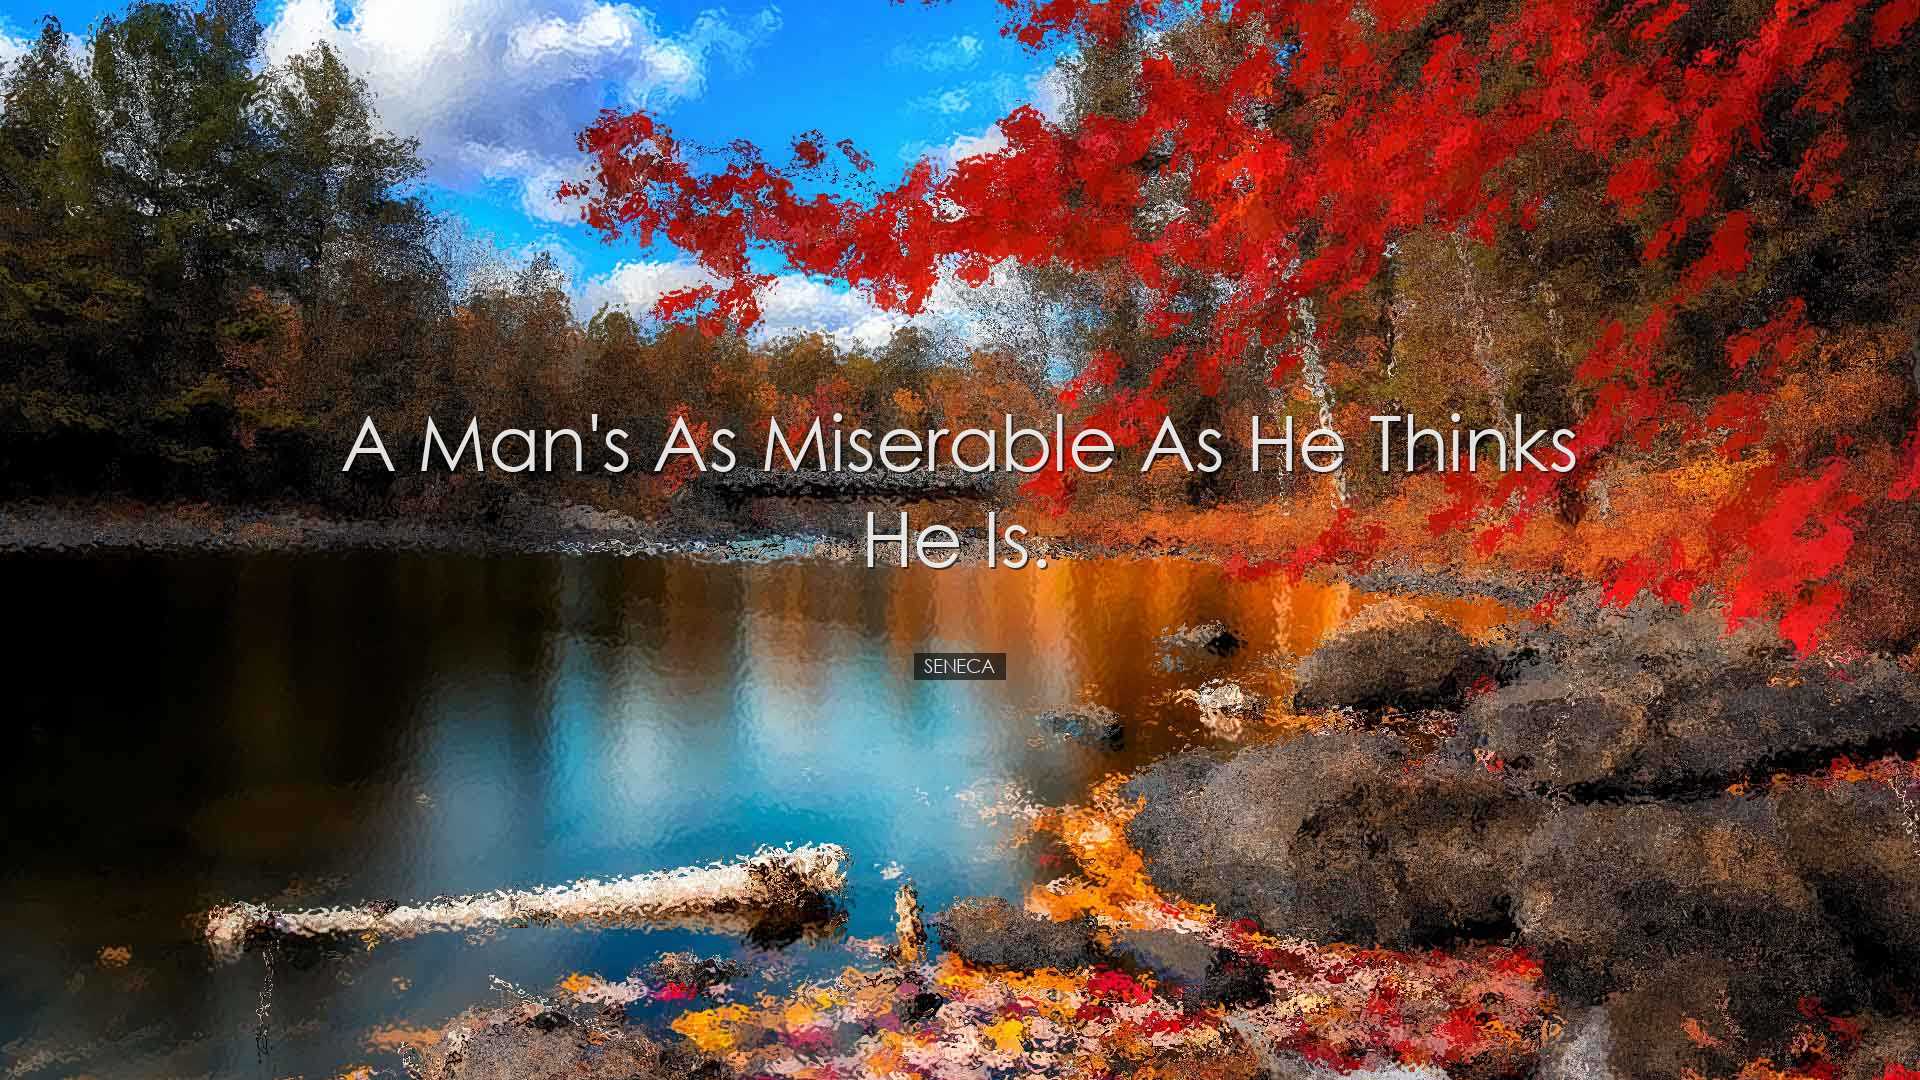 A man's as miserable as he thinks he is. - Seneca